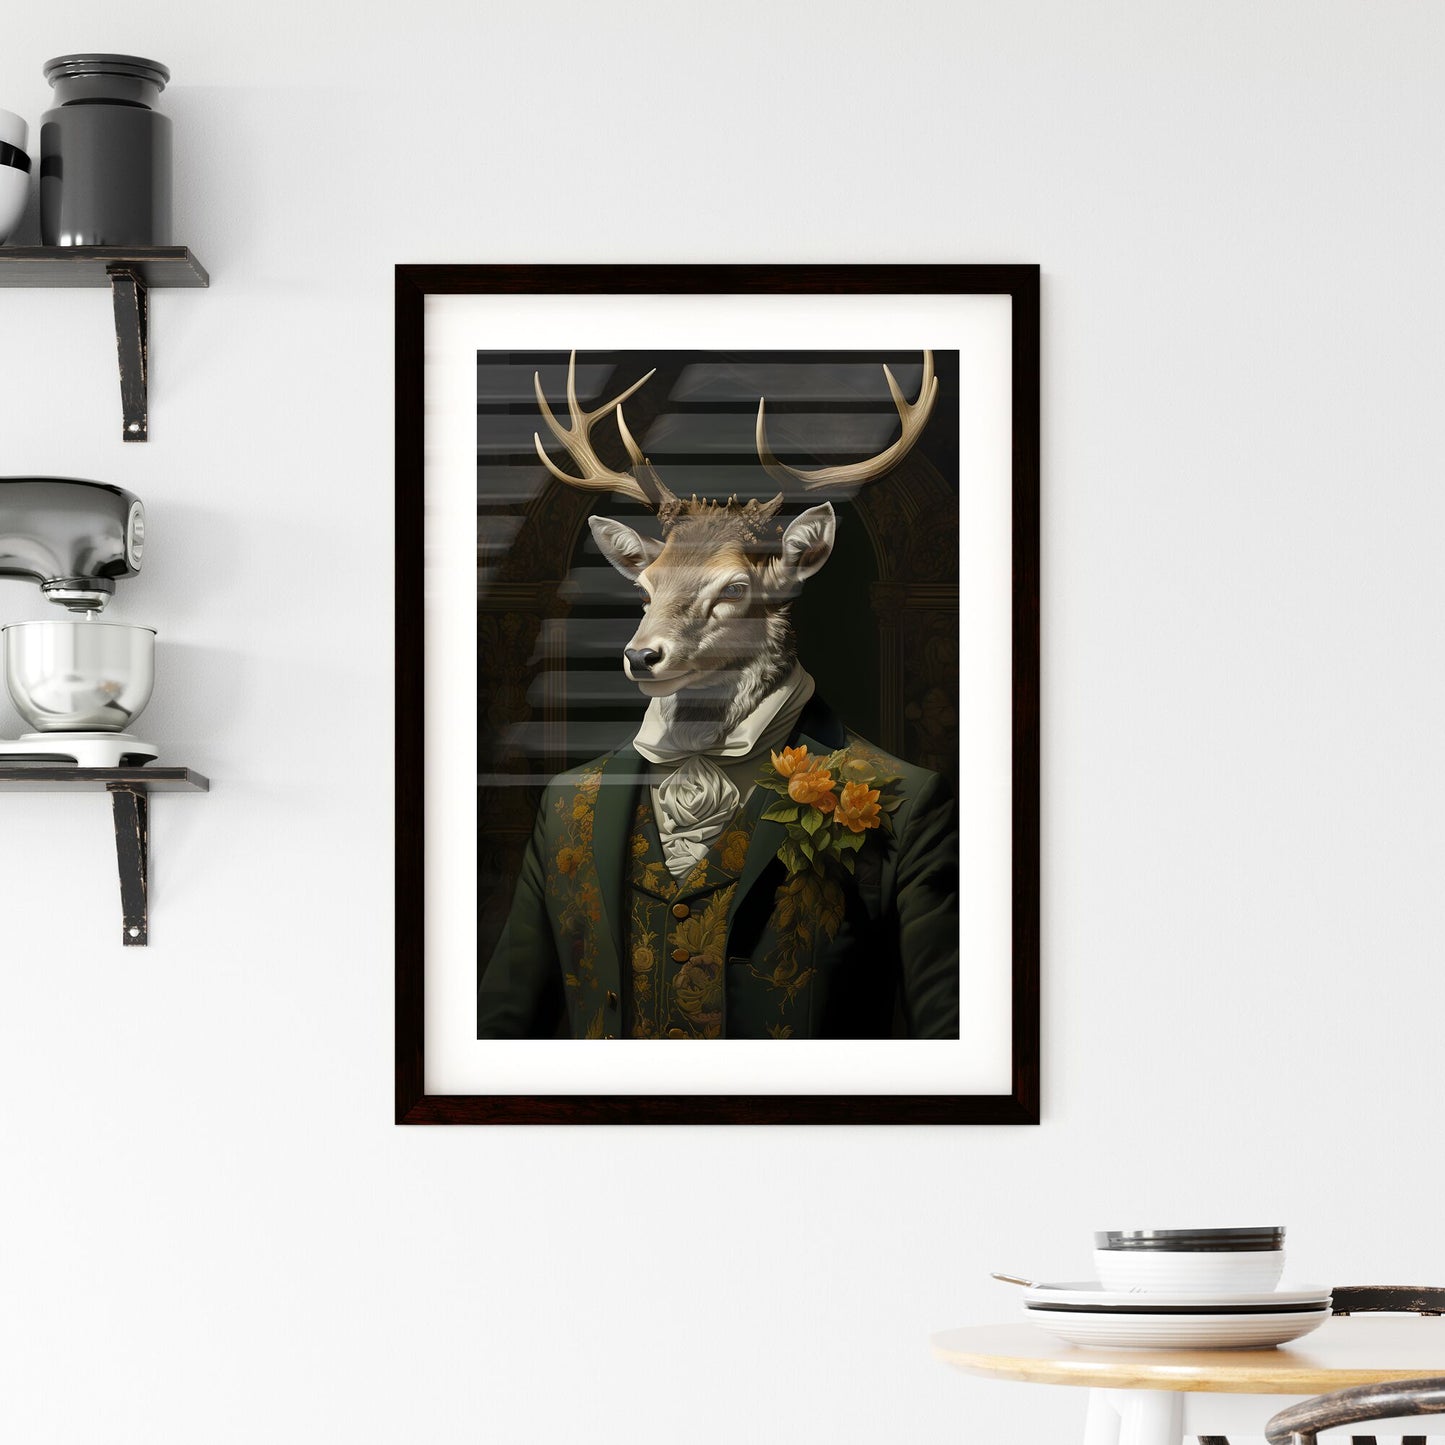 A Poster of tweed tufas art stag painting - A Deer In A Suit Default Title